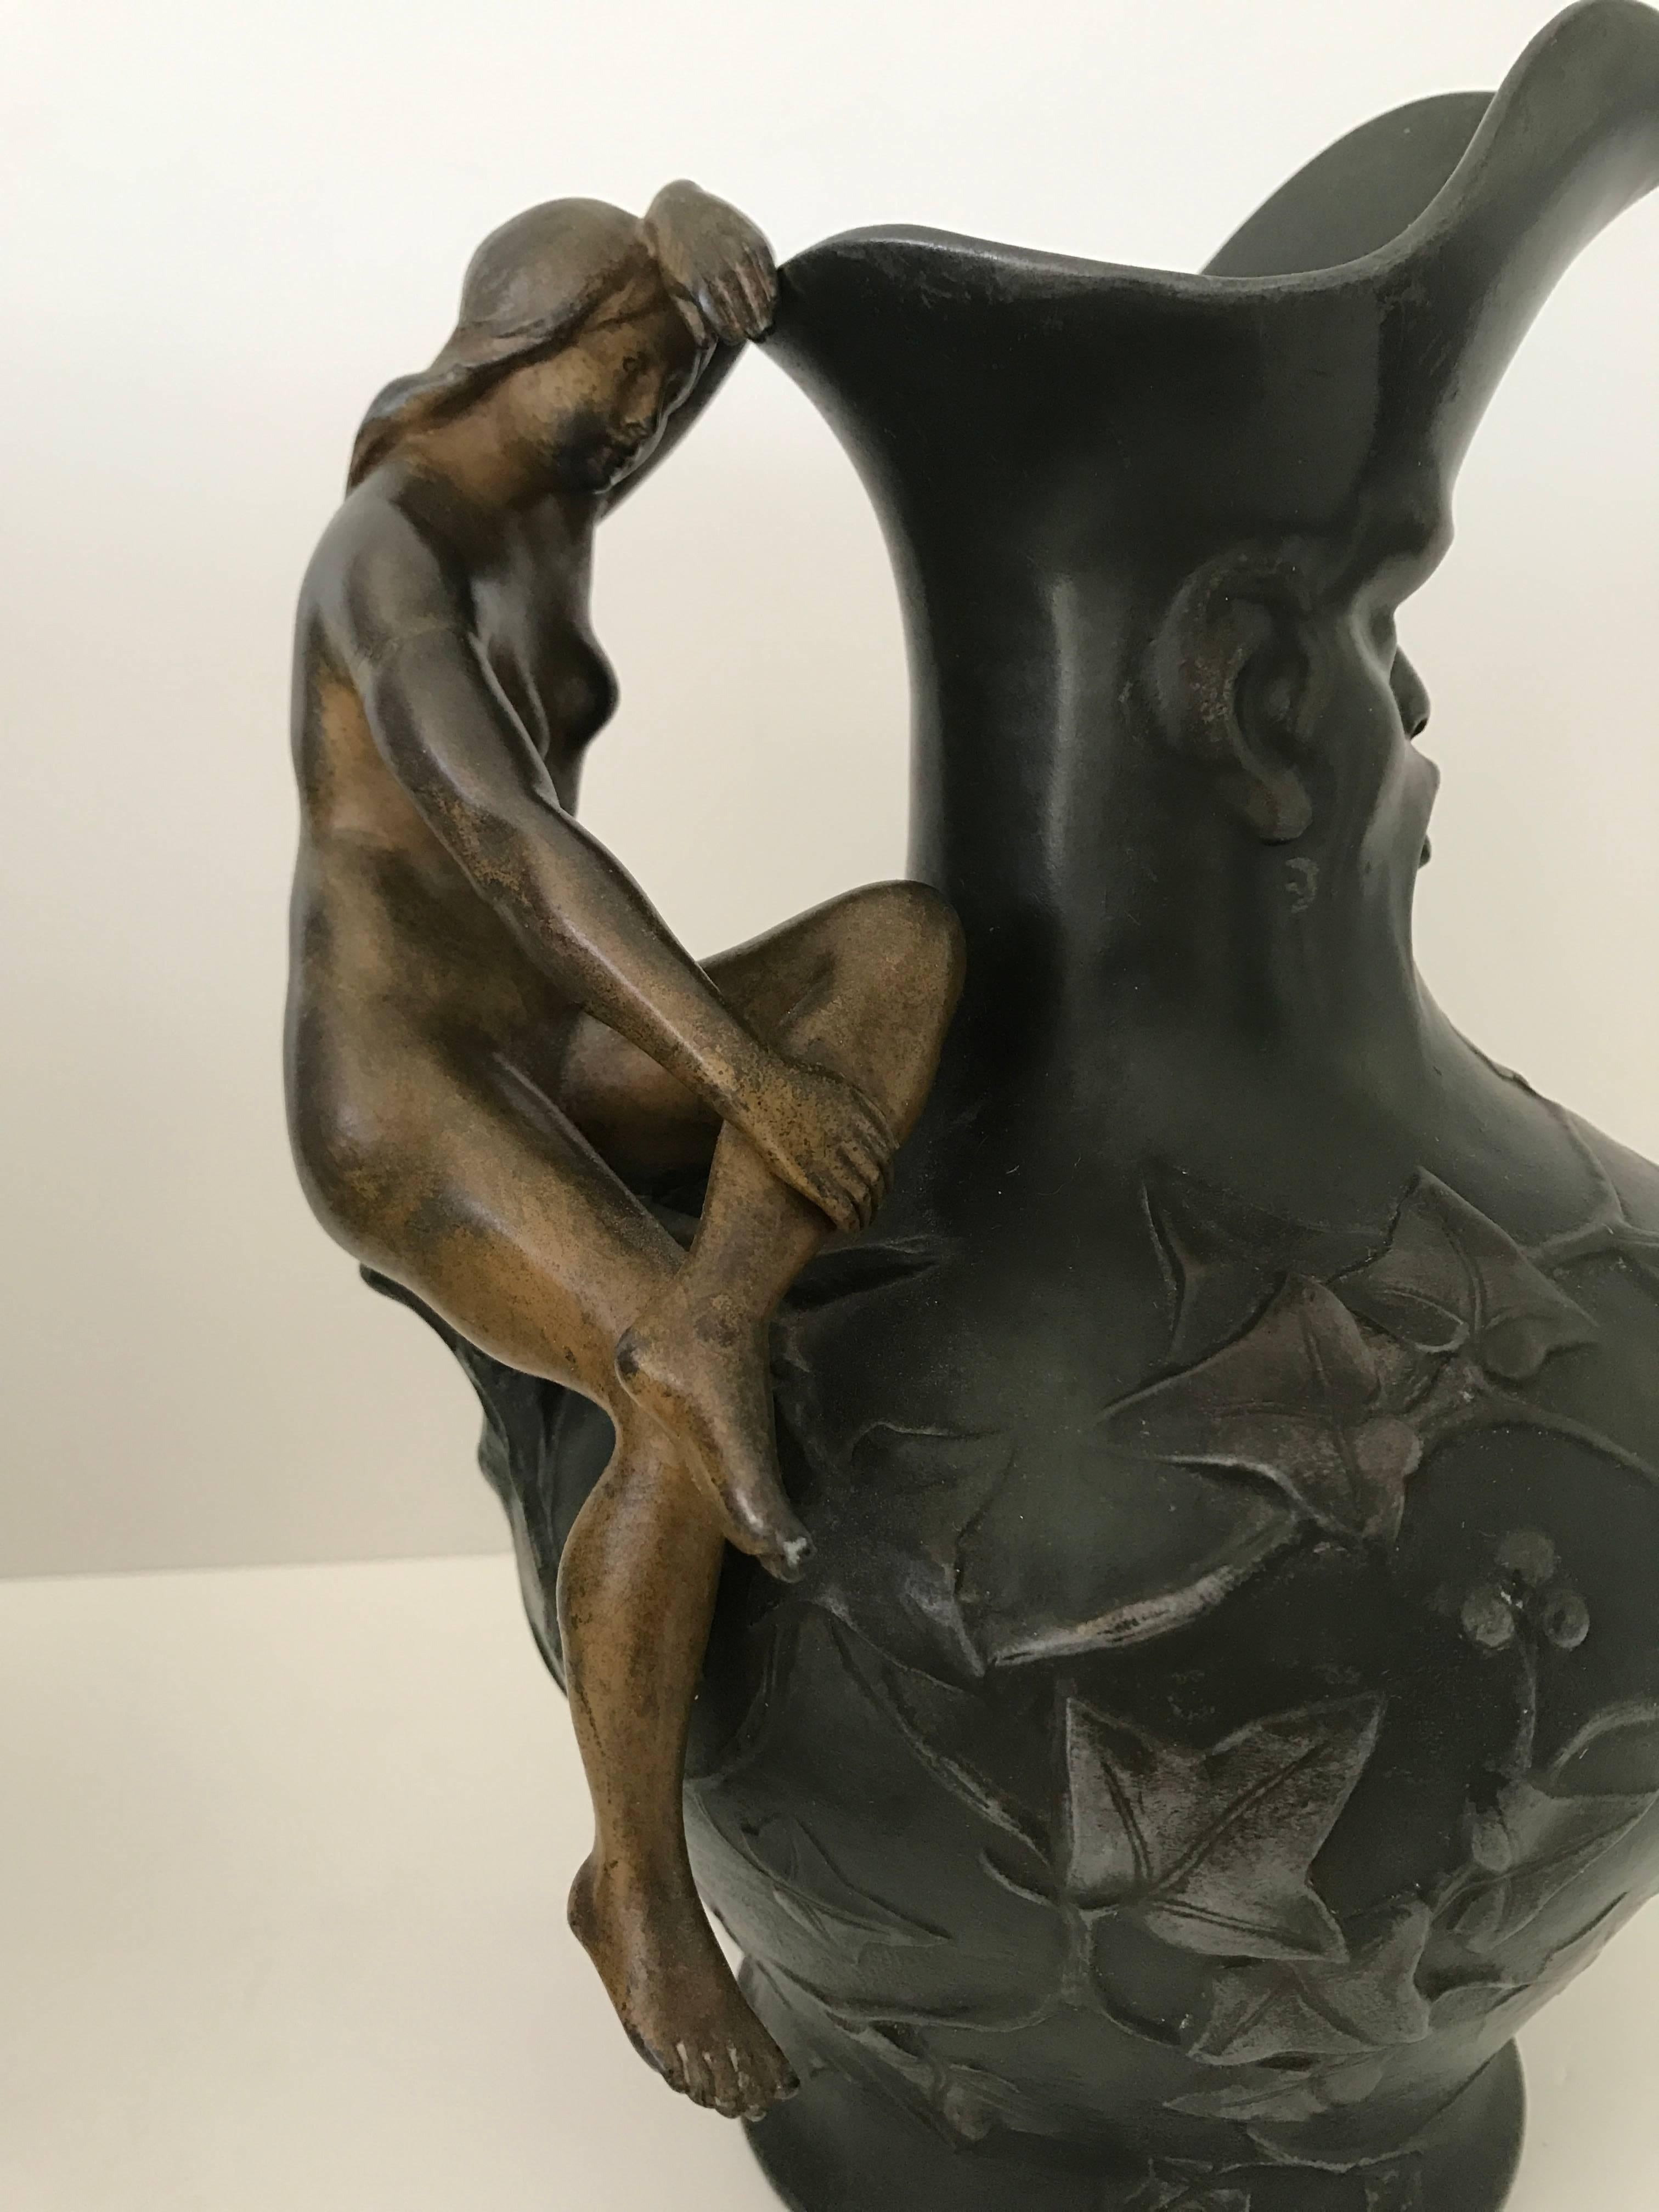 Late 19th century bronze patinated pewter pitchers Charles Théodore Perron.
Very nice pitchers made out of what we can believe, Pewter or some other metal, patinated as bronze. Two naked ladies as handles and a mans face on the neck and branches